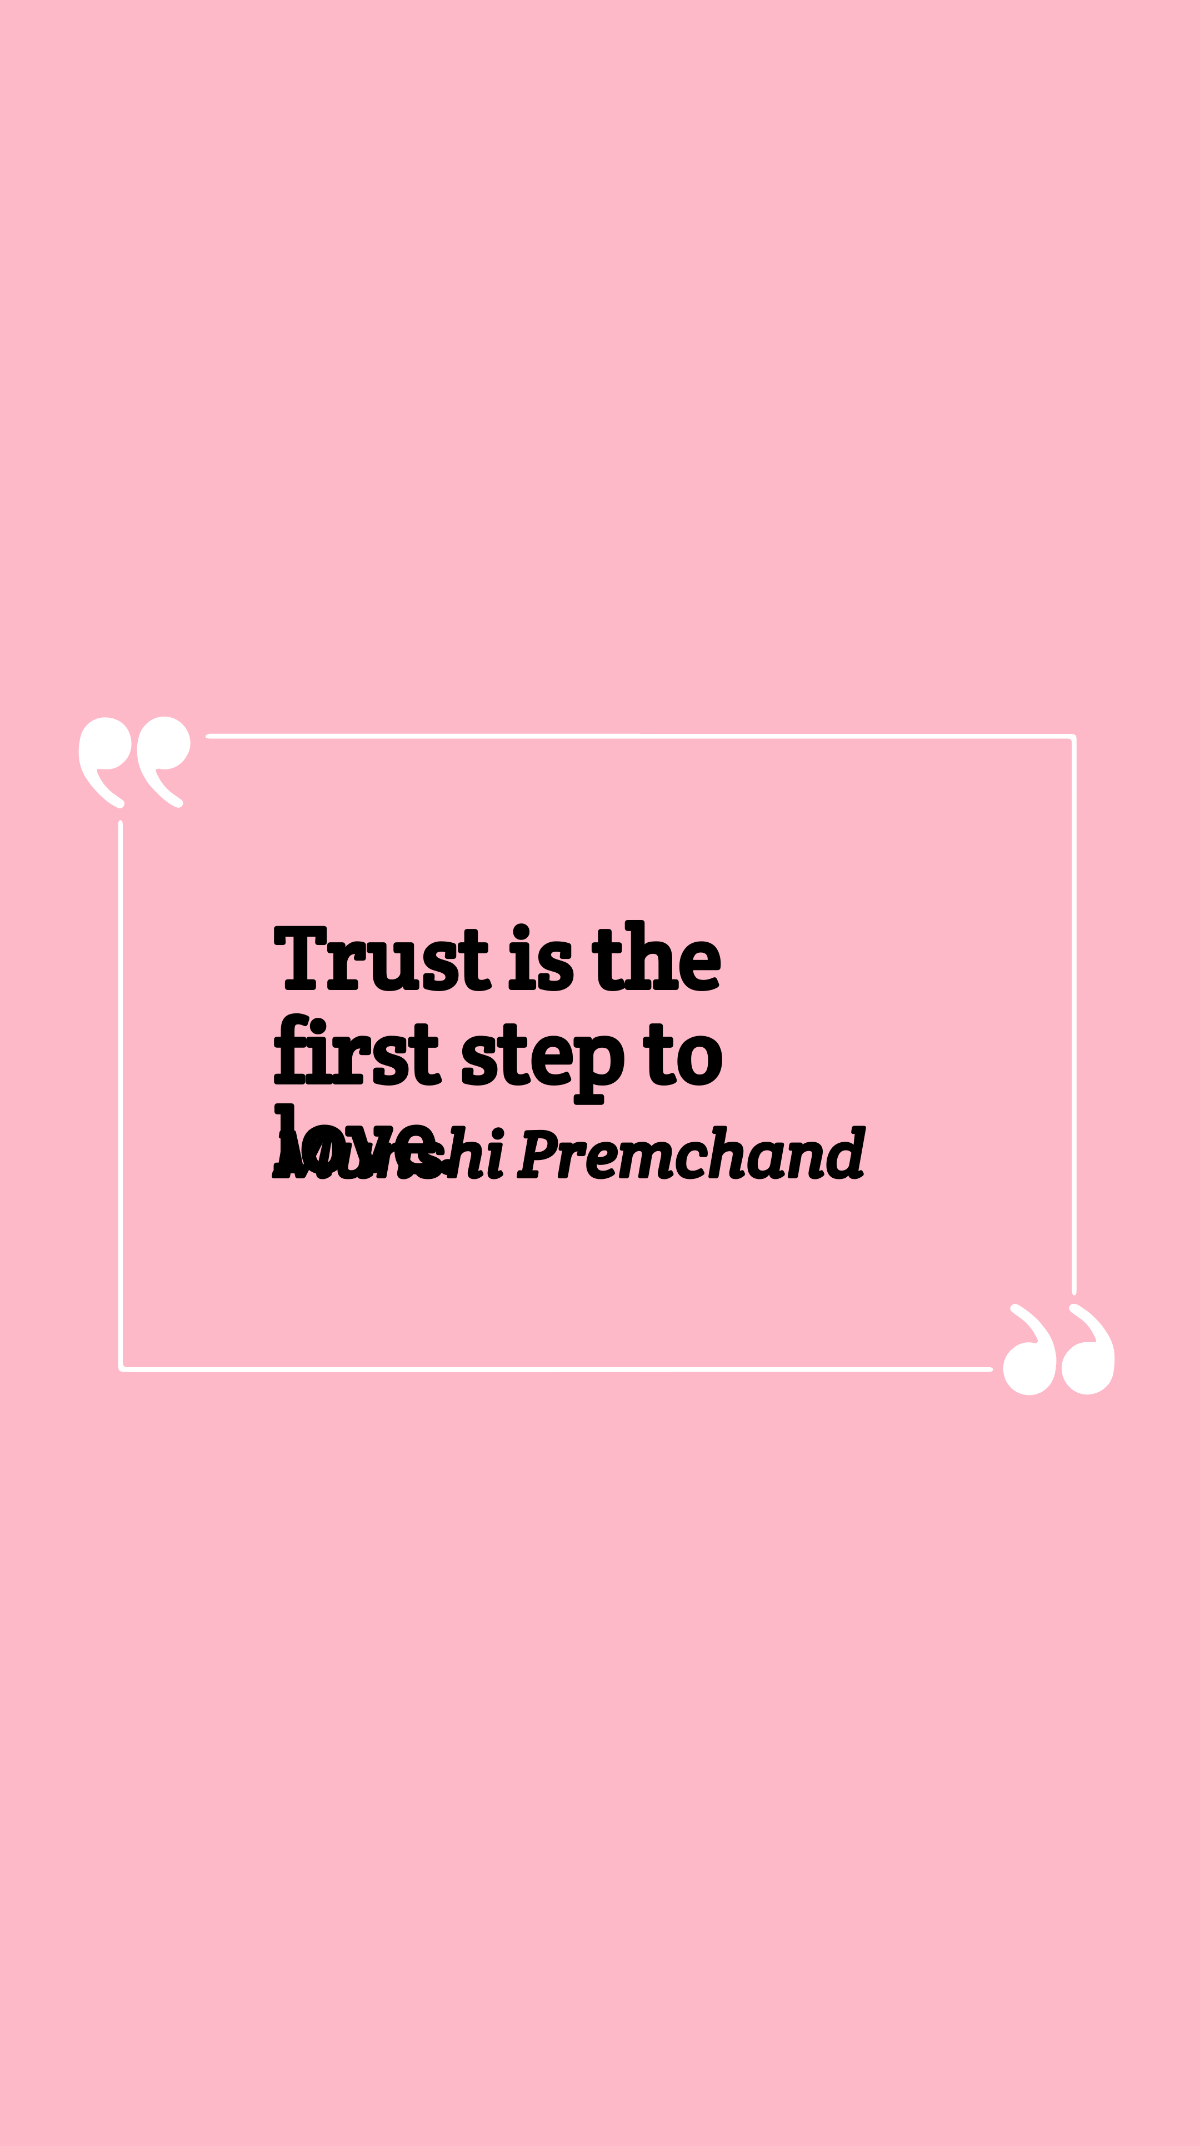 Munshi Premchand - Trust is the first step to love. Template